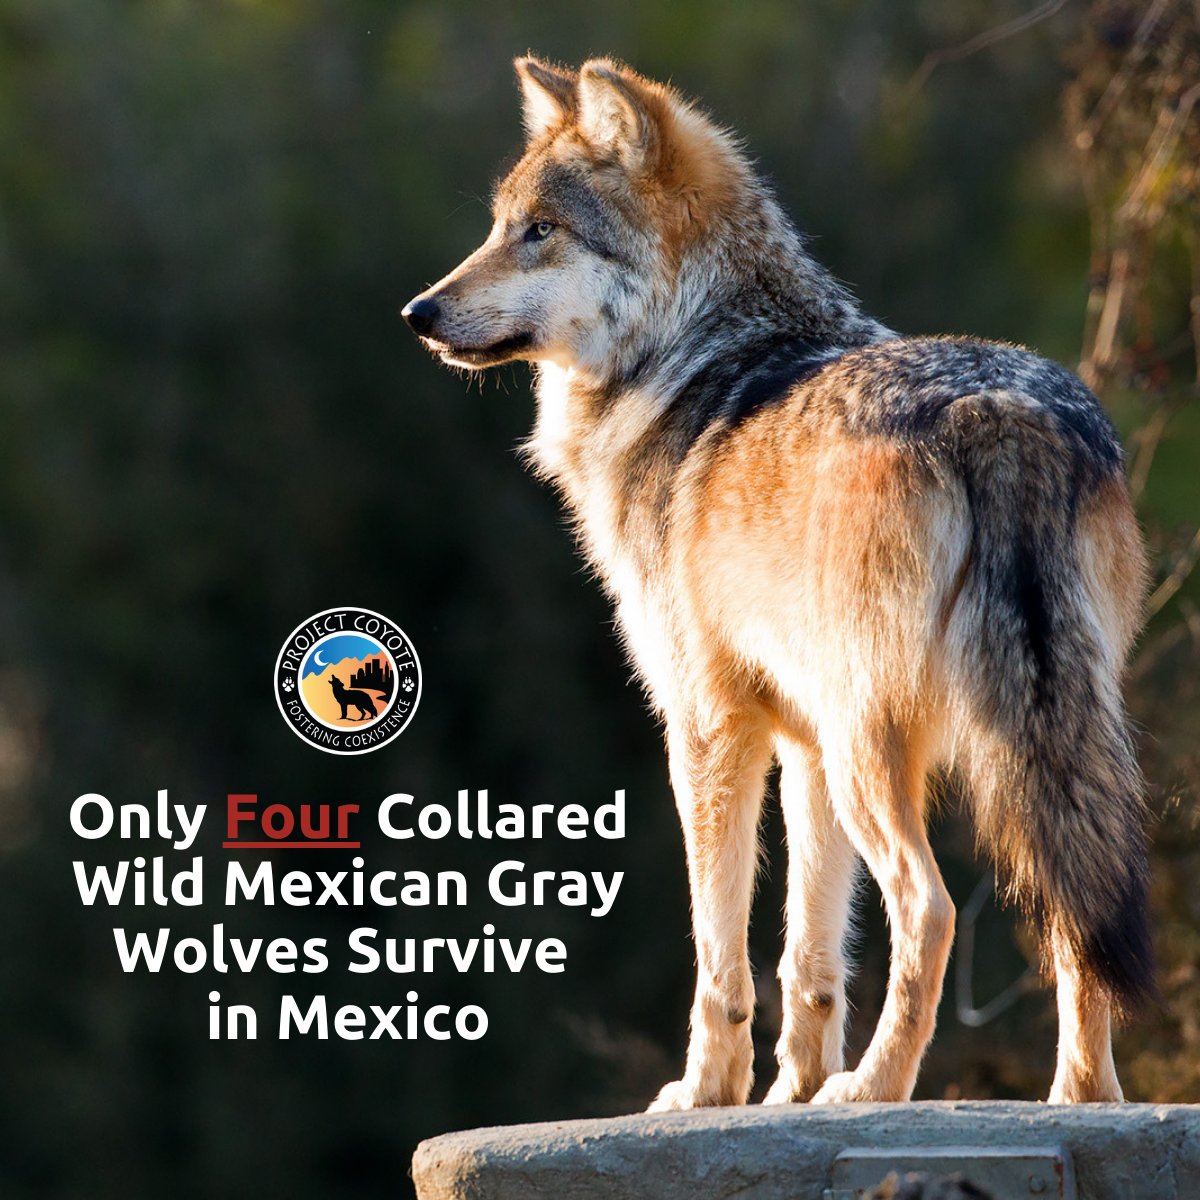 ‼️ Only four collared wild Mexican gray wolves currently survive in Mexico ‼️

Read the full media release: tinyurl.com/yc34p9vs

#MexicanGrayWolf #EndangeredSpecies #ProtectAmericasWolves #WolfWednesday #Lobo #Wolf #Wolves #Wildlife #USFWS